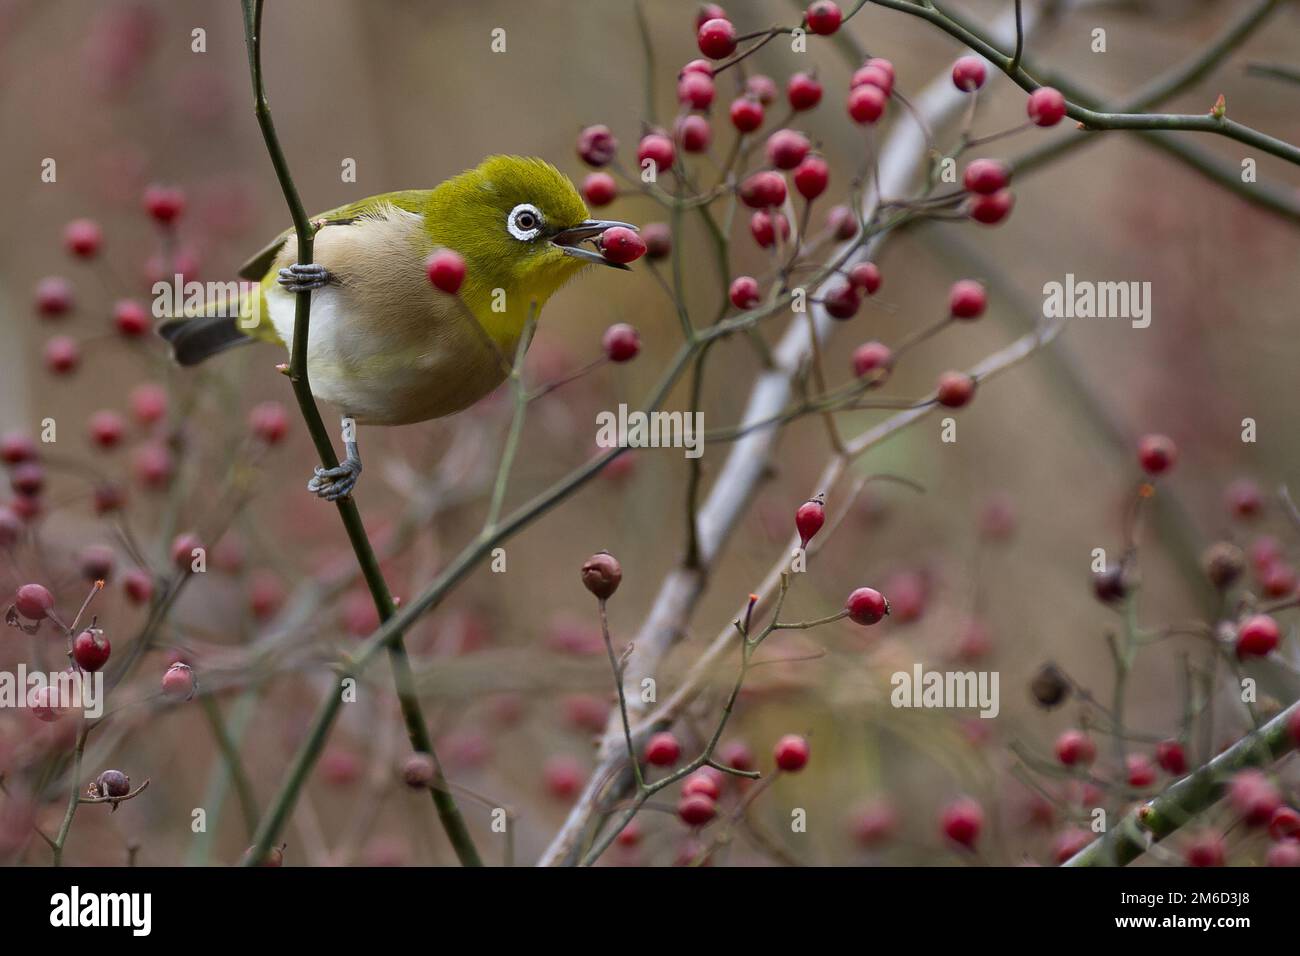 A Japanese white-eye (Zosterops japonicus) eating berries in a park in Kanagawa, Japan. Stock Photo